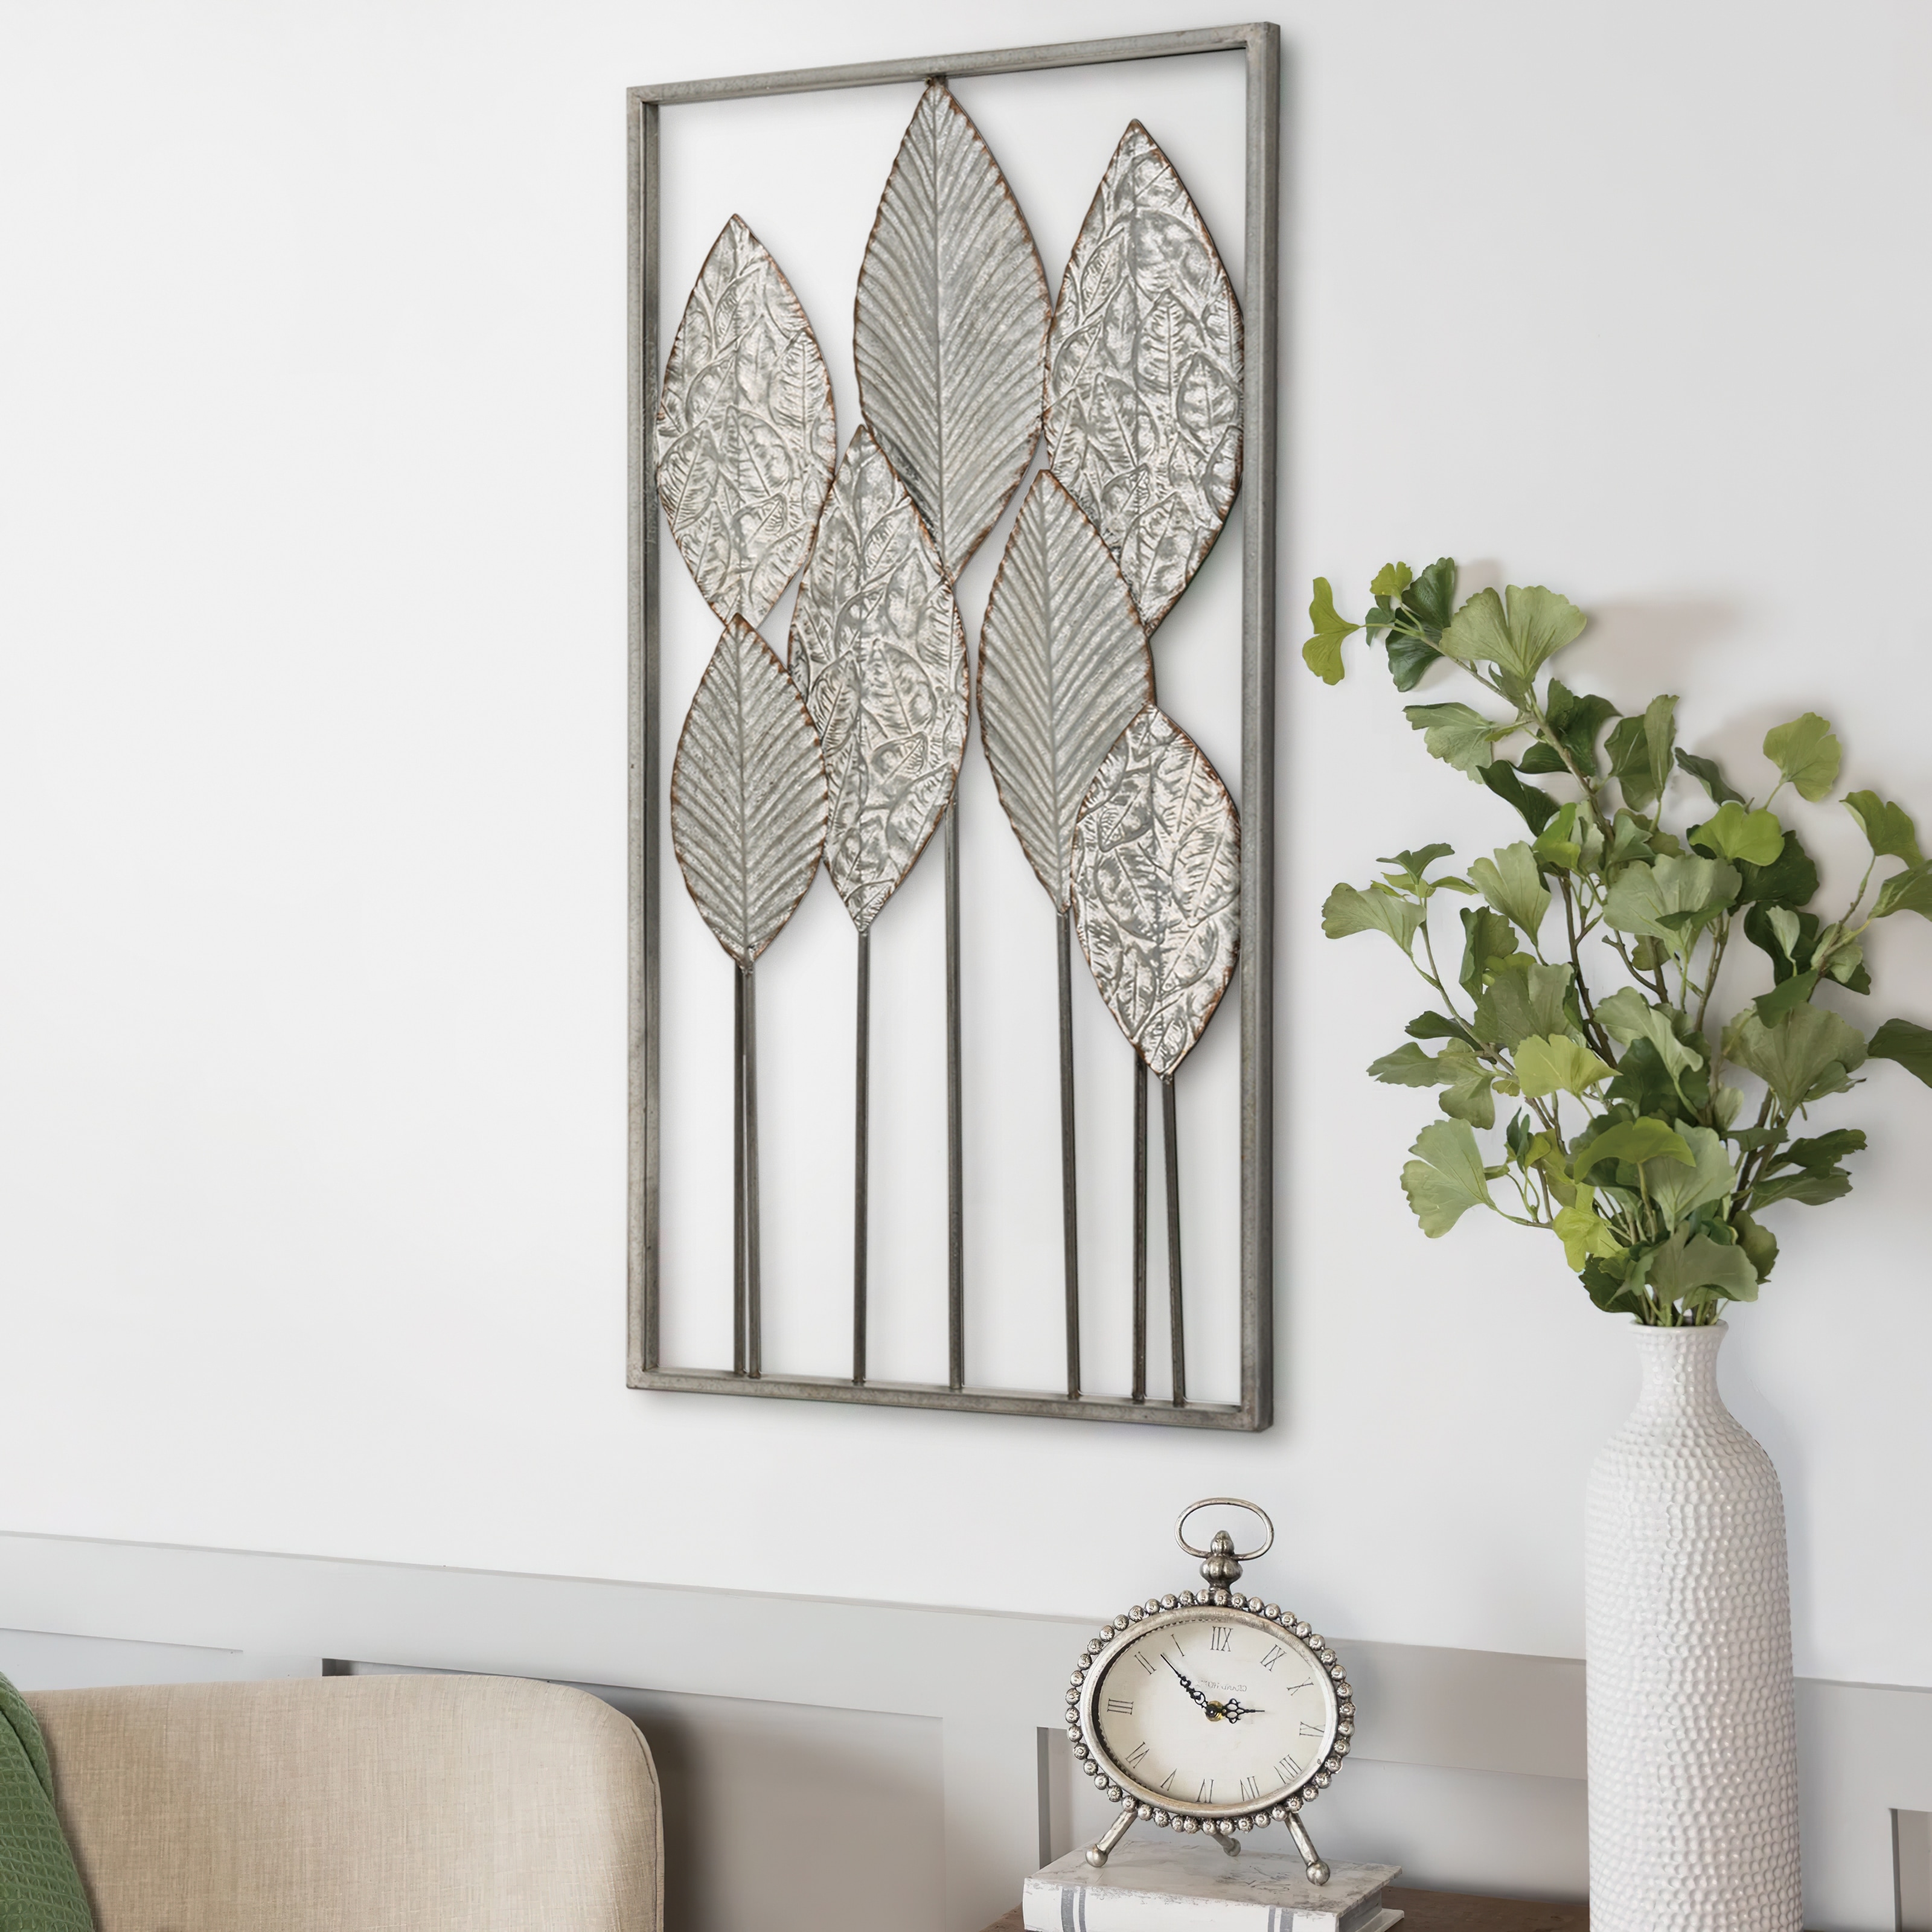 COZAYH Farmhouse Metal Leaves Wall Decor, Distressed Wall Art Hanging for Home  Living Room Decors Bed Bath  Beyond 36240417